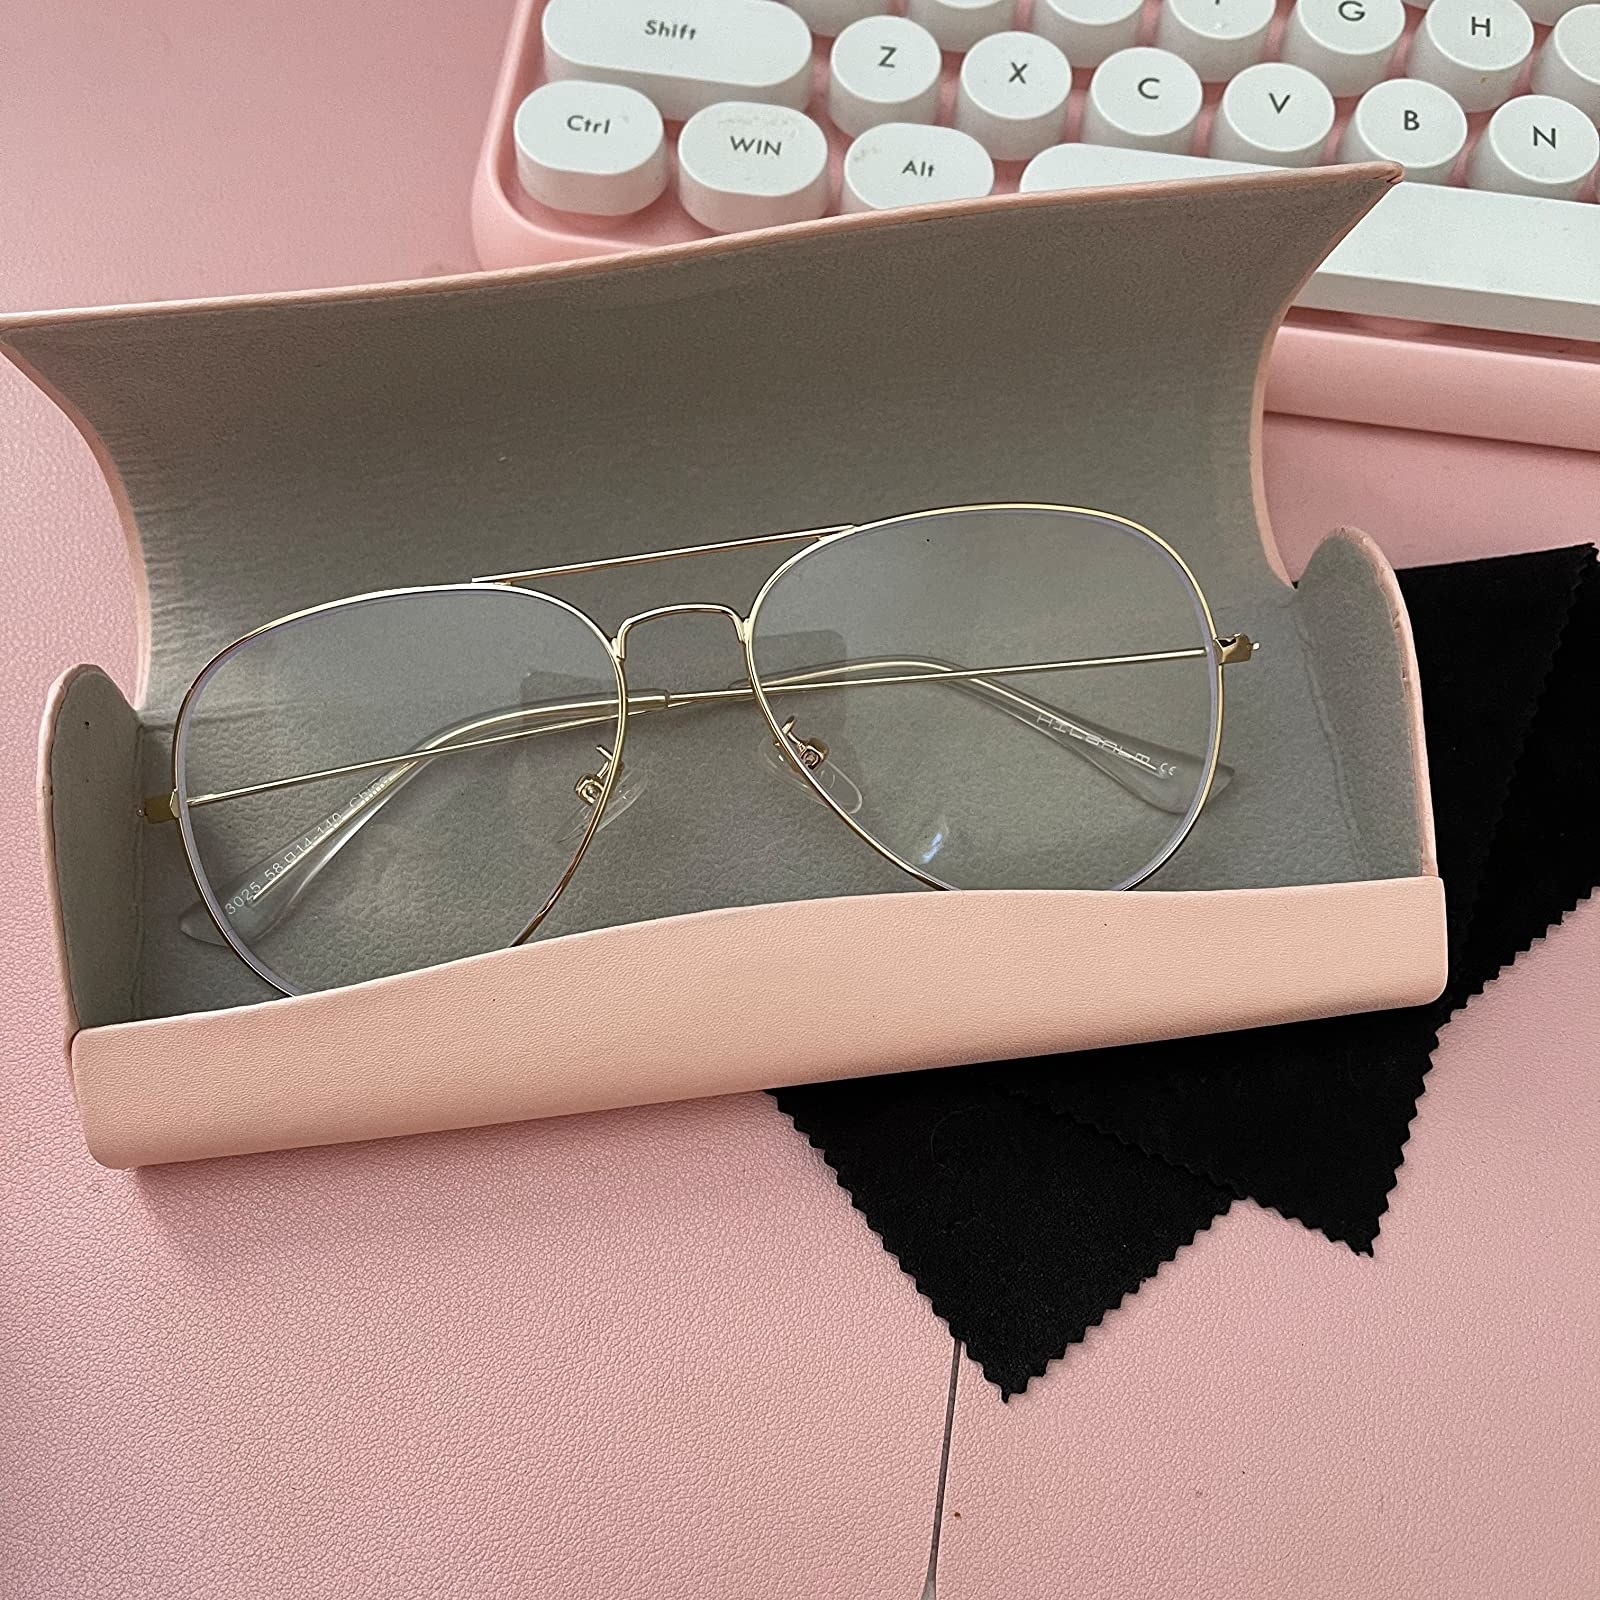 Reviewer image of their glasses in the pink case